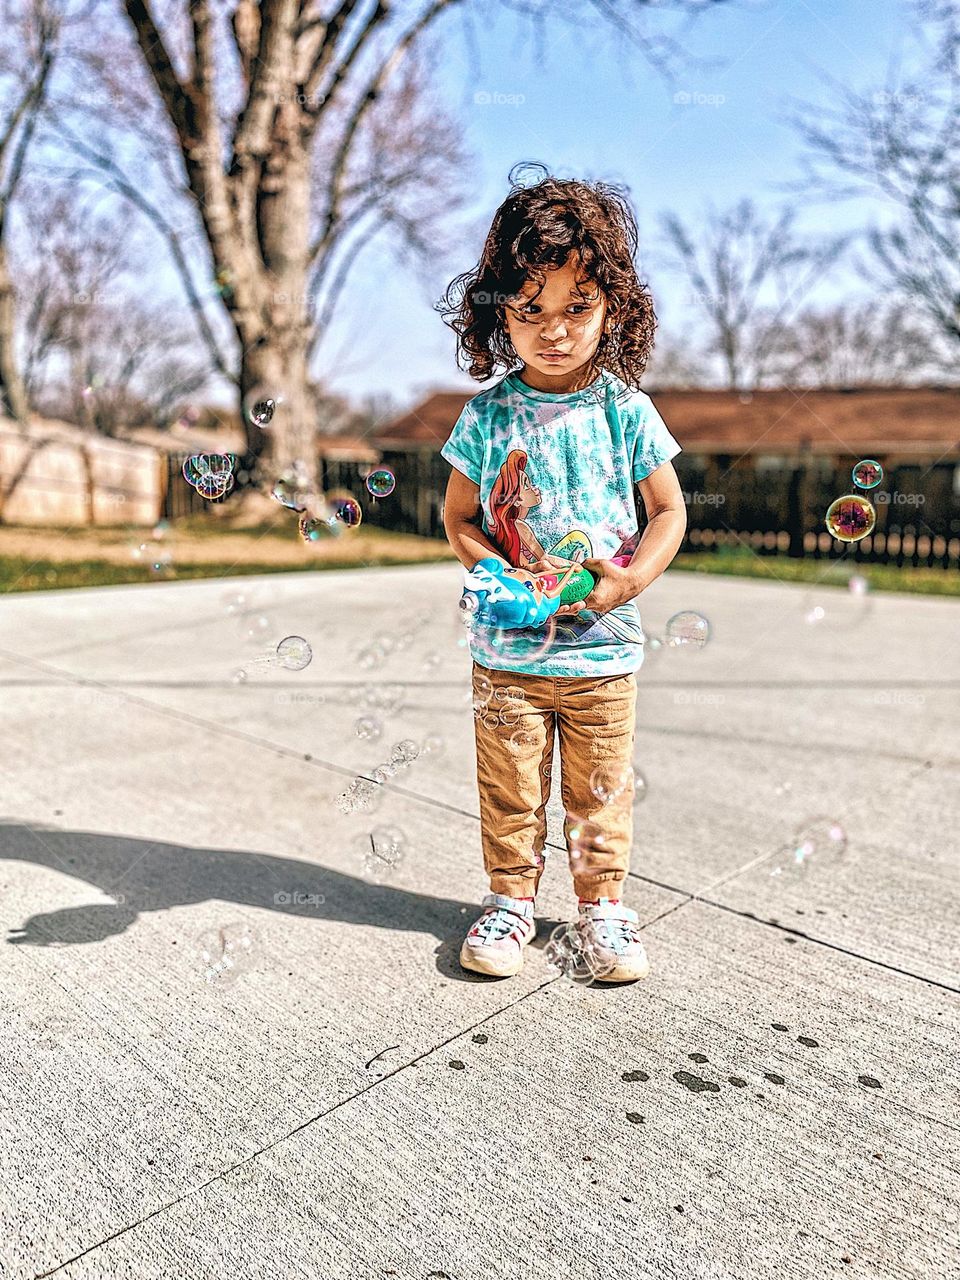 Toddler girl outside blowing bubbles, unusually warm winter weather, go outside, kids and bubbles, fun activities for children, toddler girl occupies herself with bubble blower, bubbles and toddlers, toddler playing outside, blowing bubbles with mom